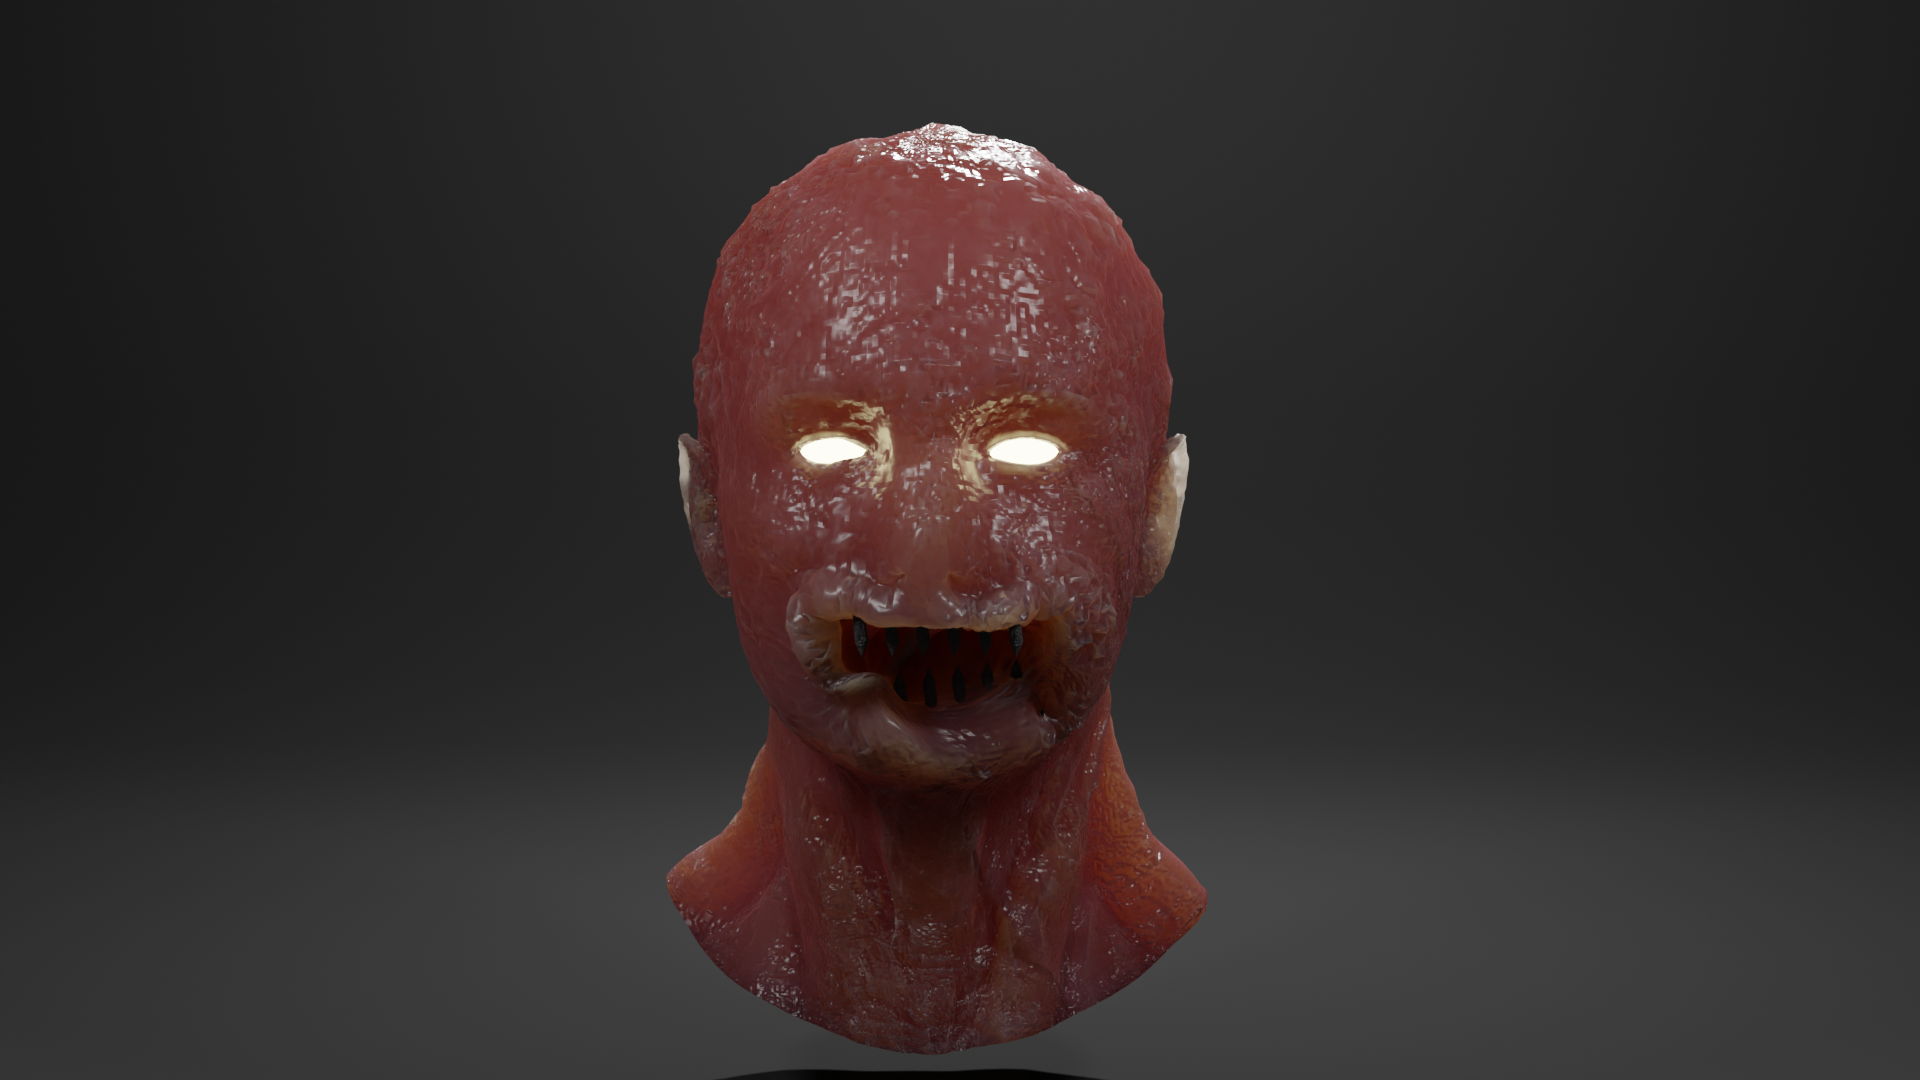 An alternate zombie 3D concept render made by Niko